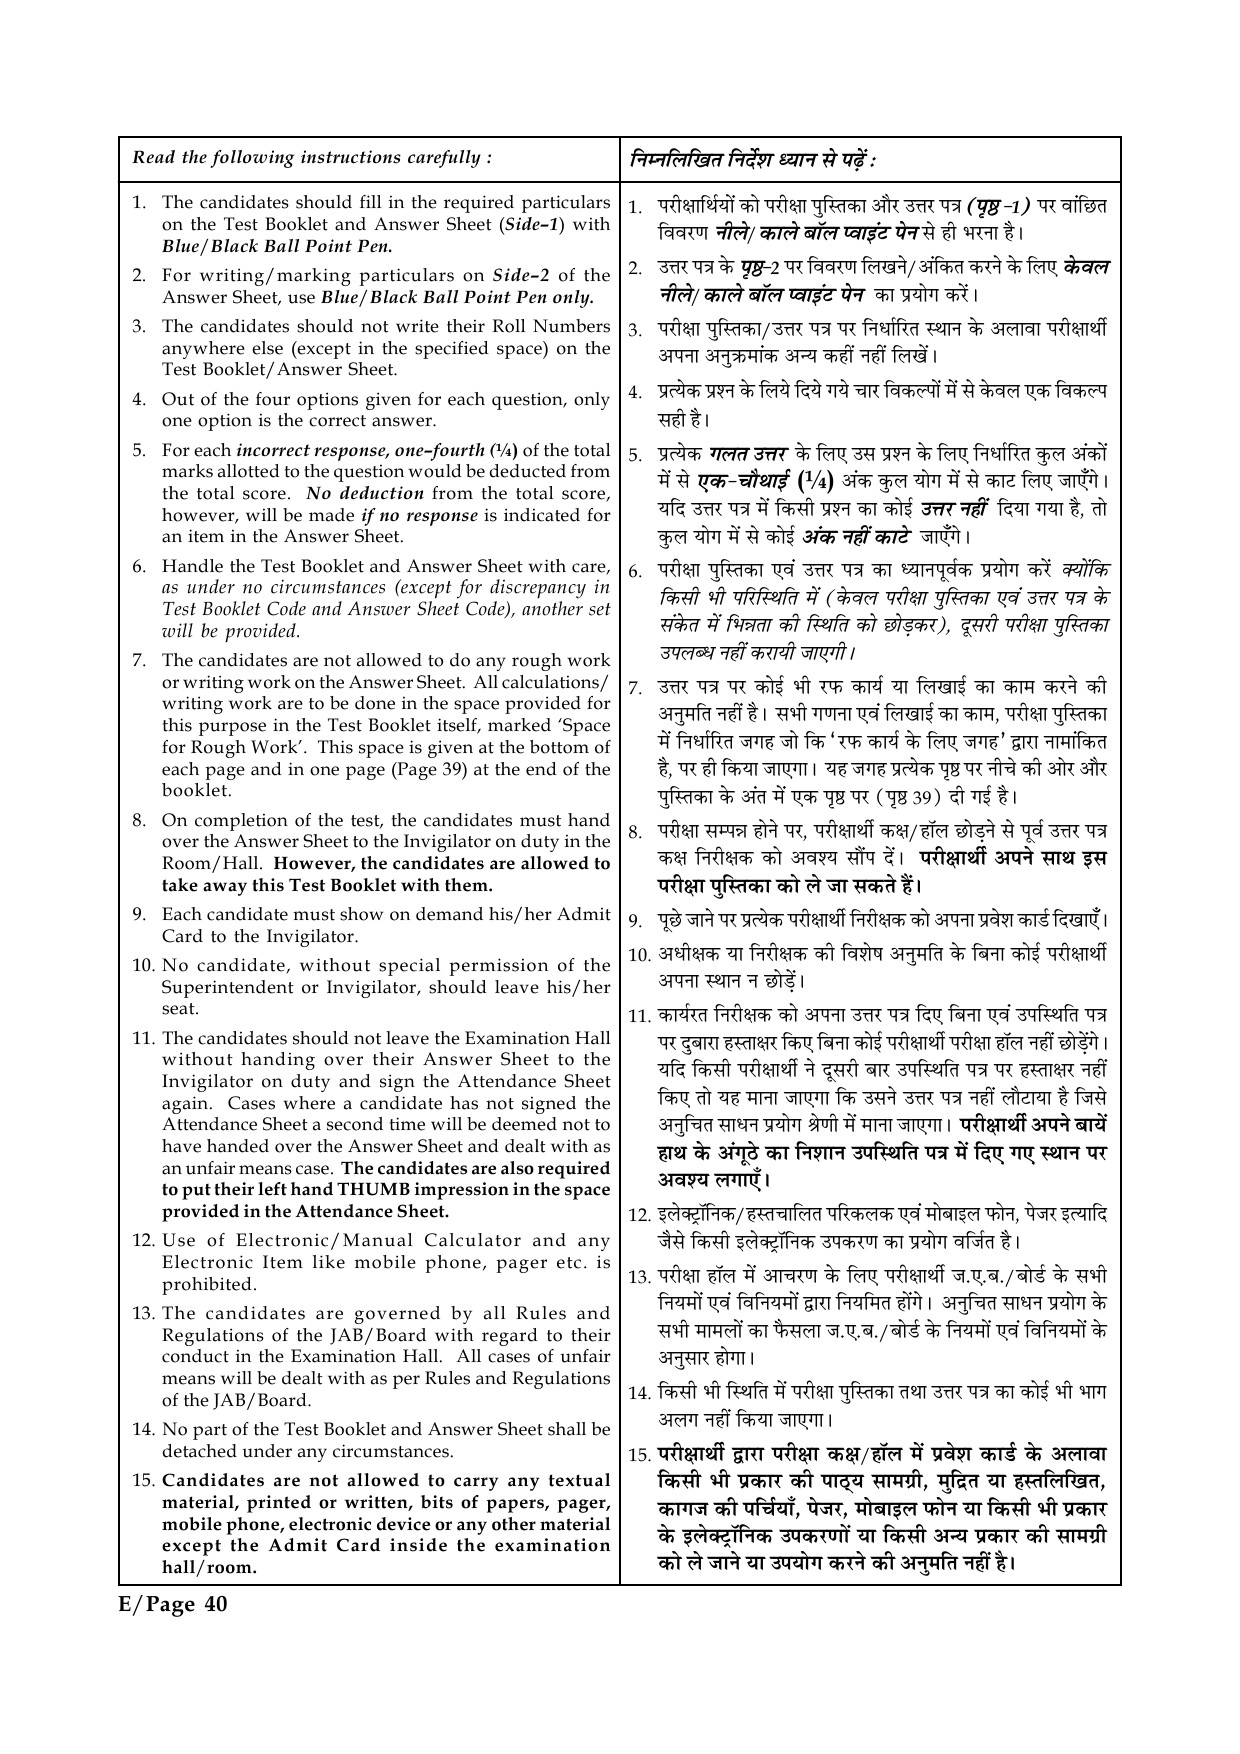 JEE Main Exam Question Paper 2014 Booklet E 39